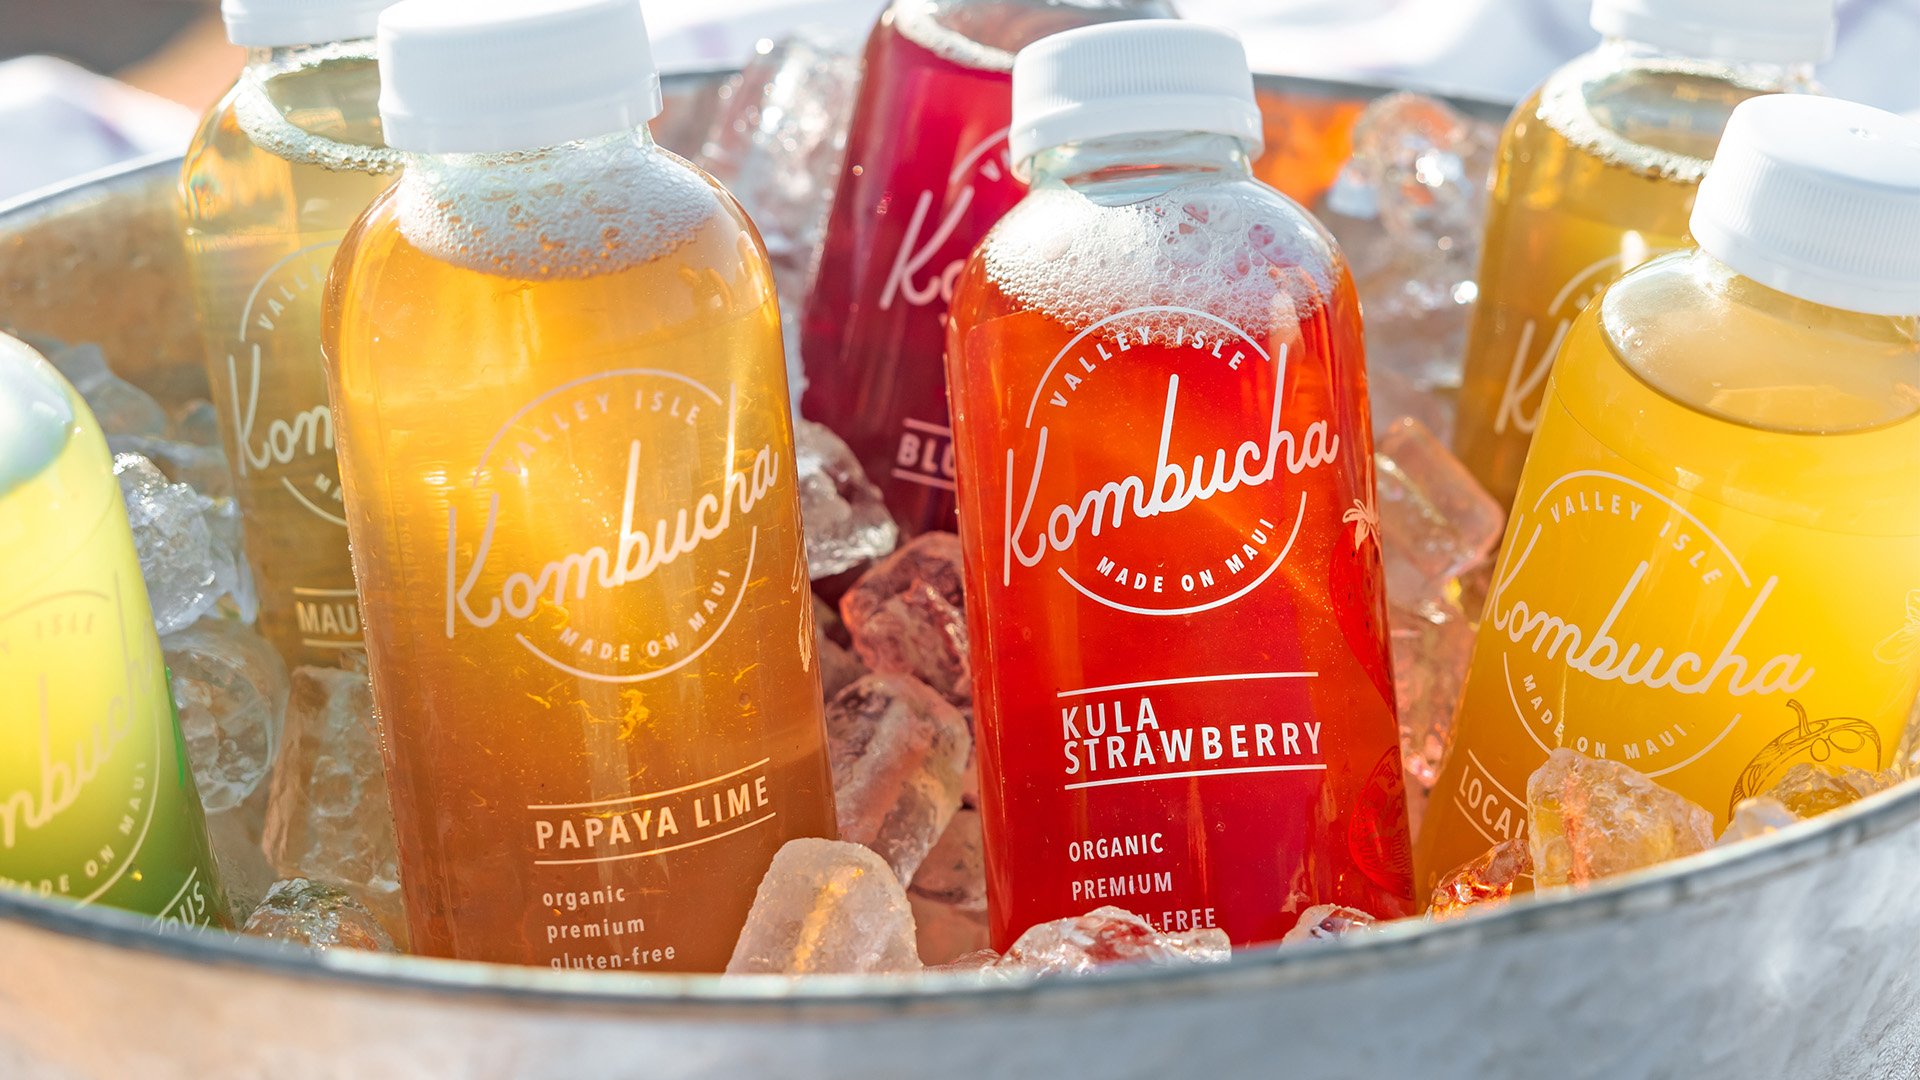 Craft Kombucha: Everything You Need to Know About This Emerging Fizzy Beverage